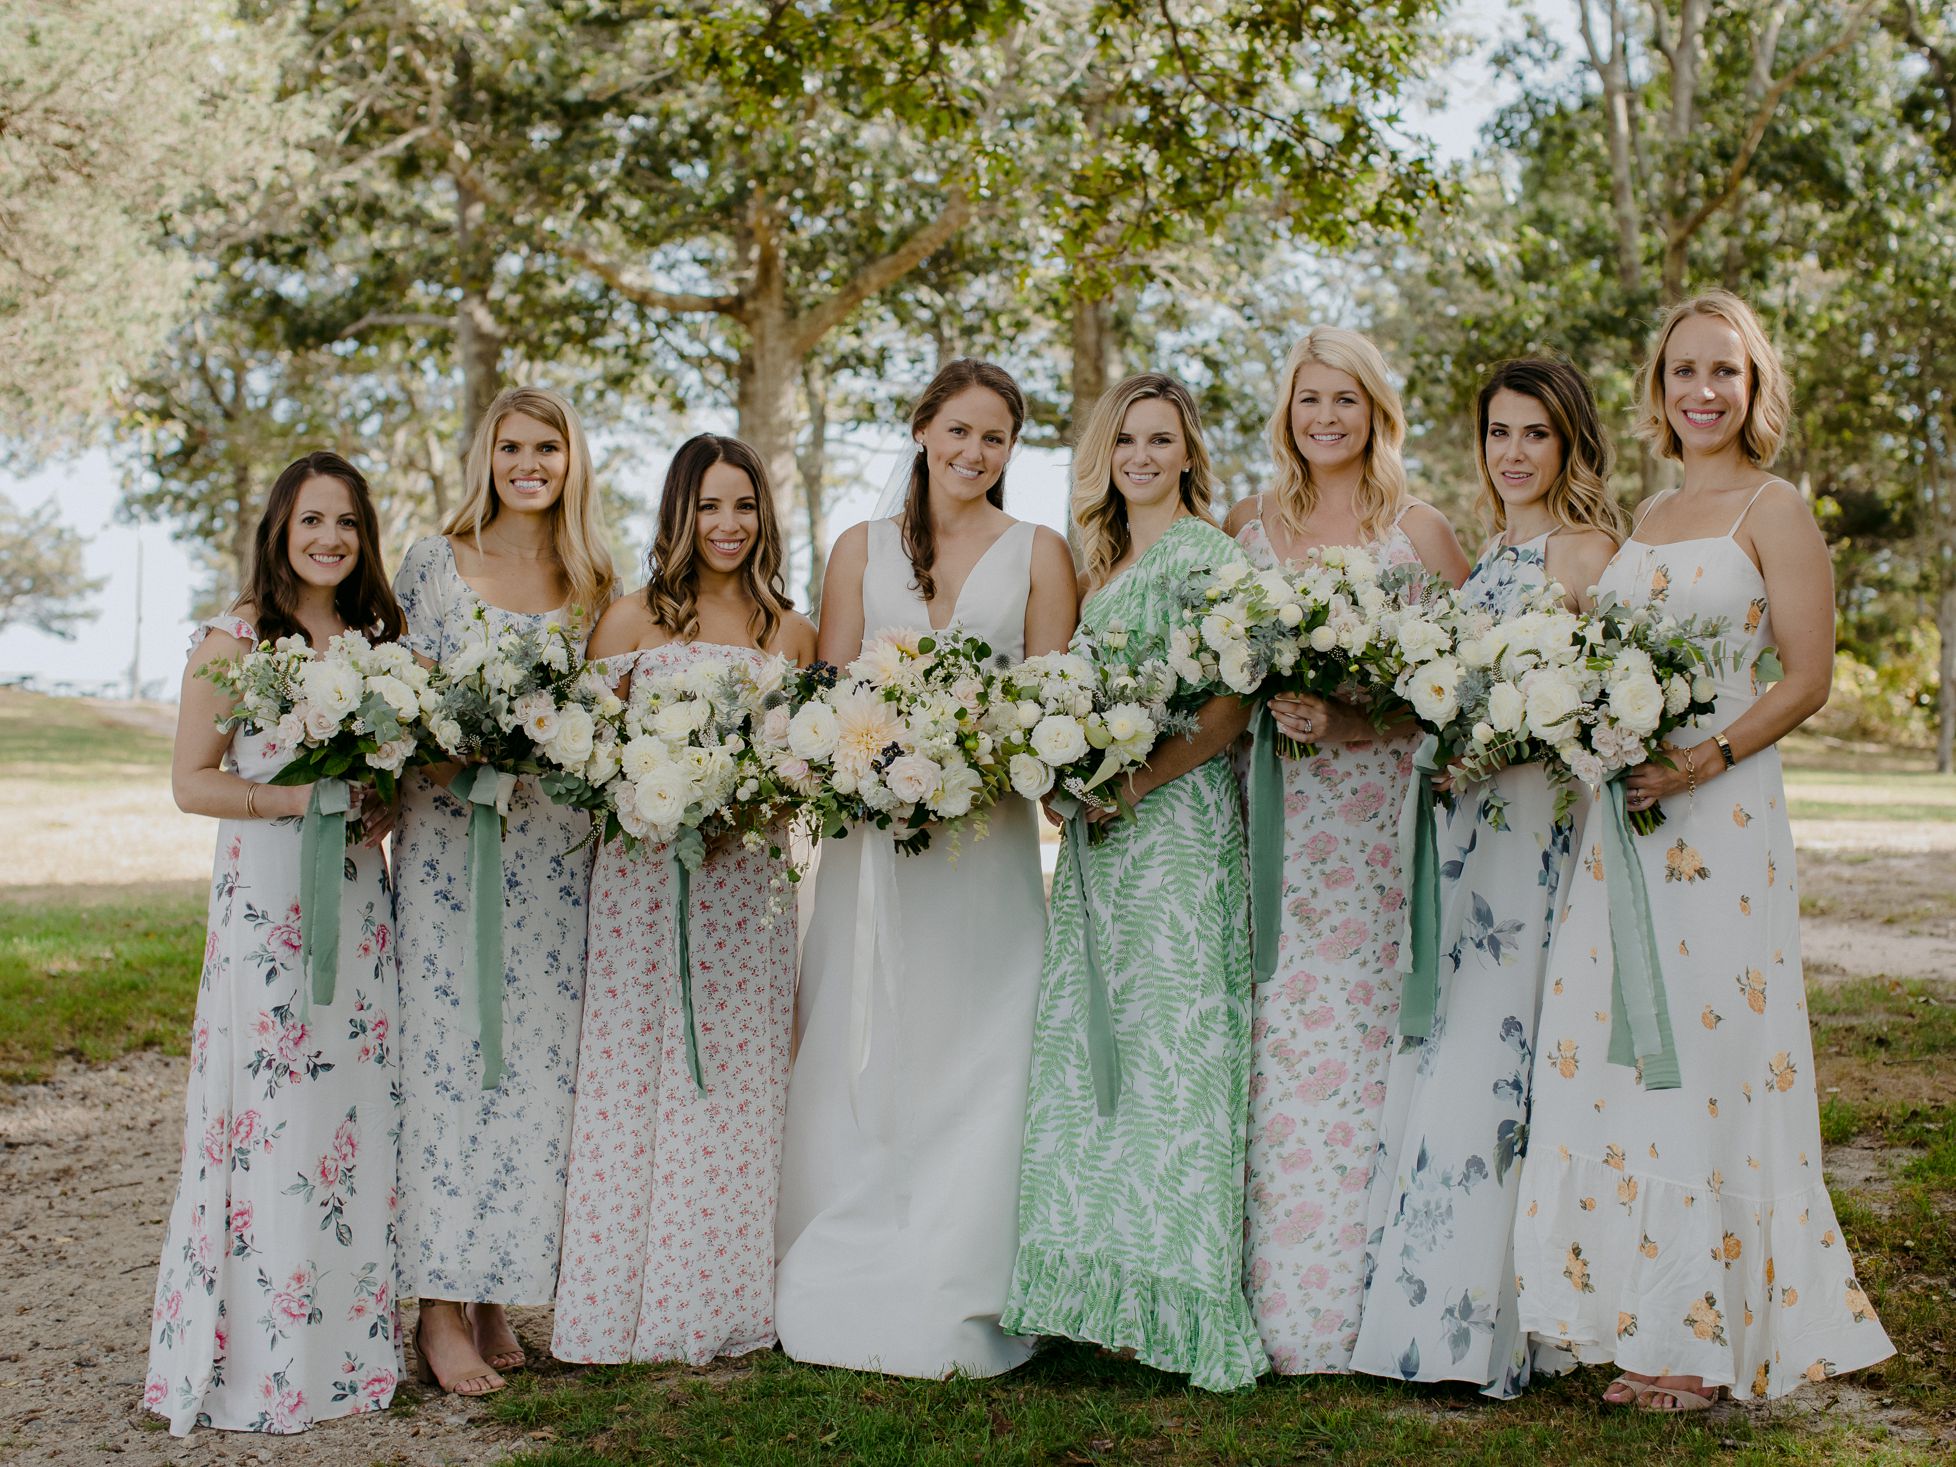 The Ultimate Gold Bridesmaid Dresses Buying Guide in 2021